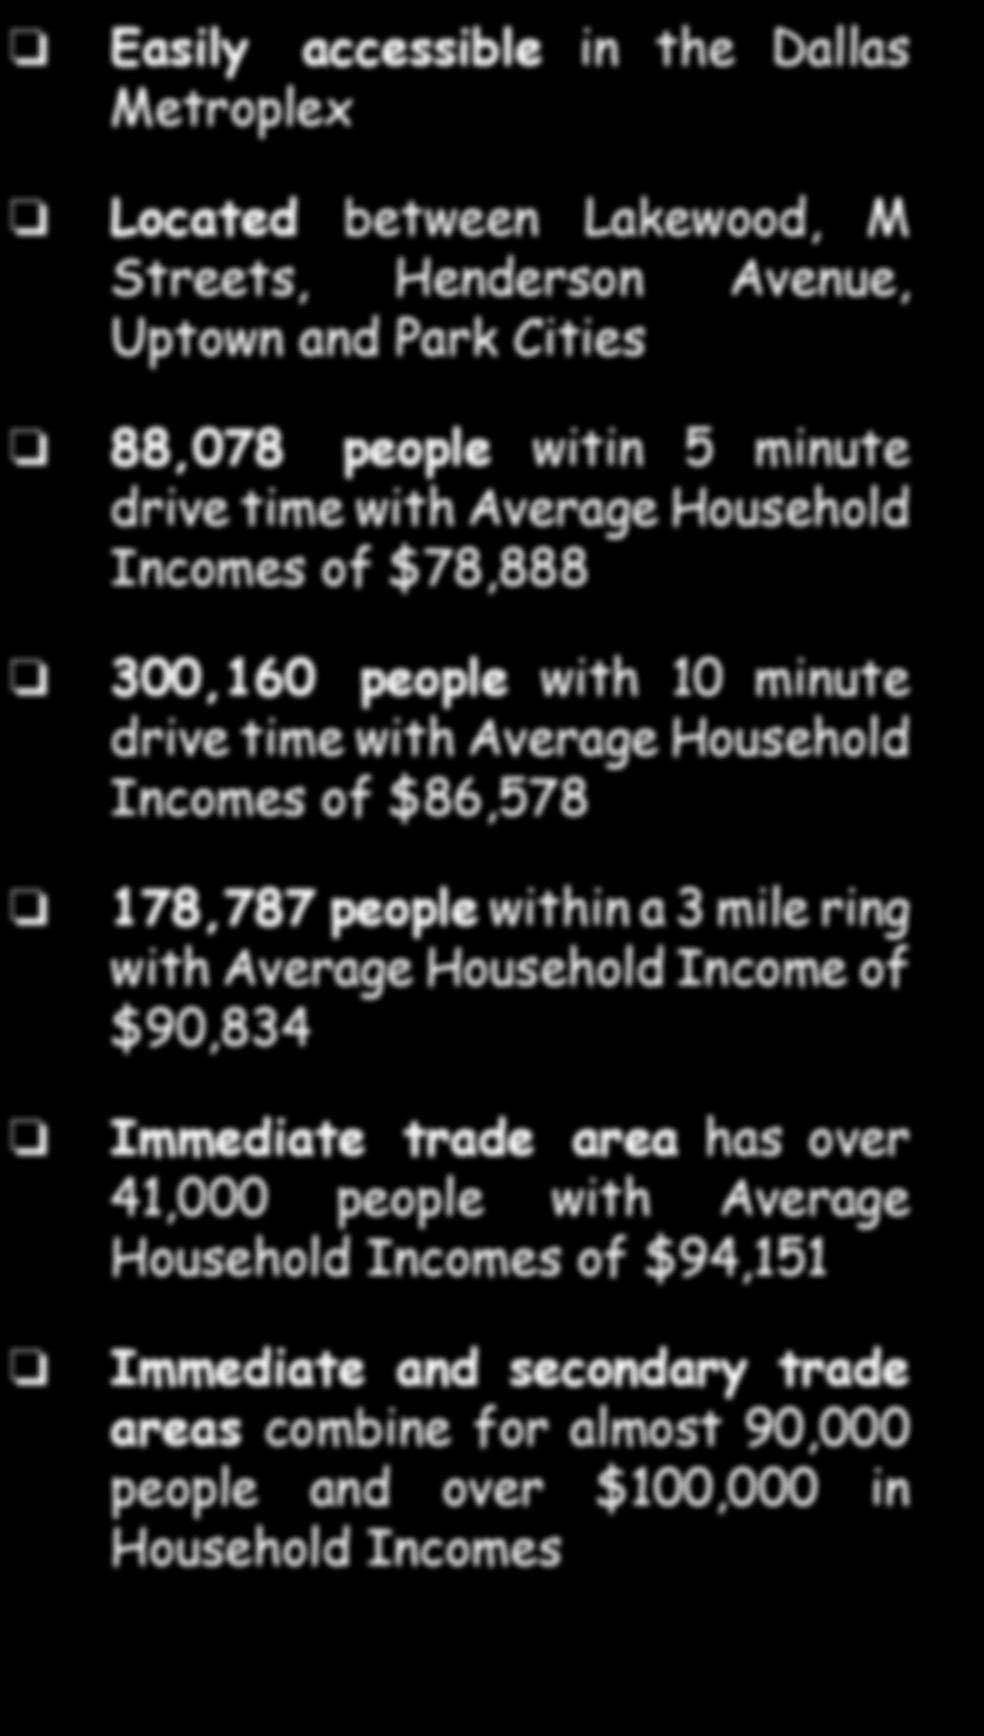 88,078 people witin 5 minute drive time with rage Household Incomes